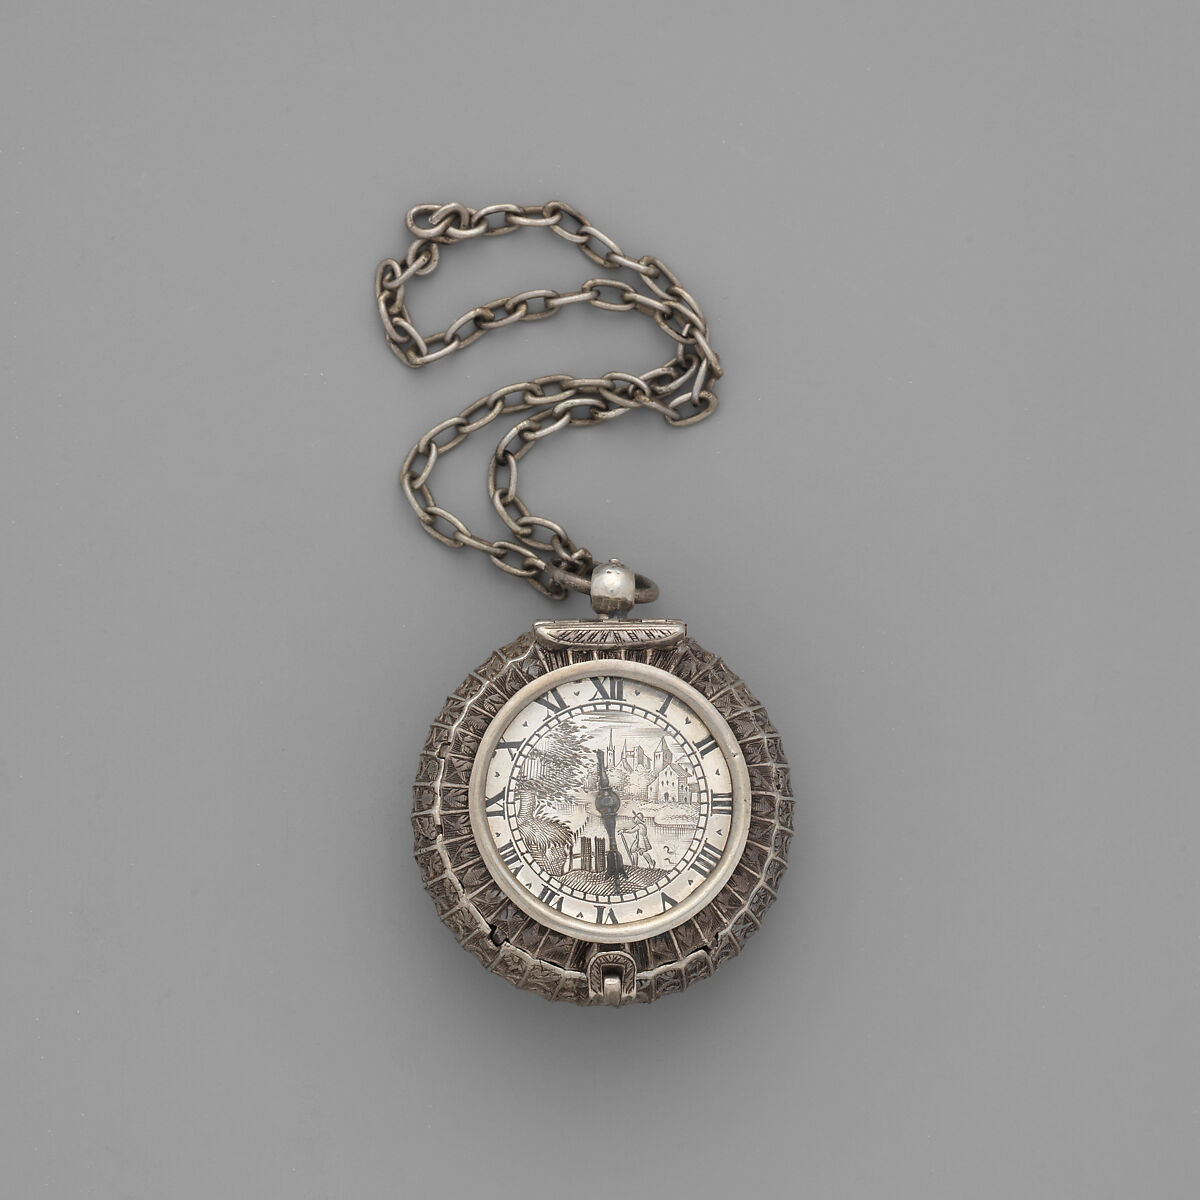 Watch and key, Watchmaker: Edward East (British, 1602–1697), Silver, gilded brass, blued steel, British, London 